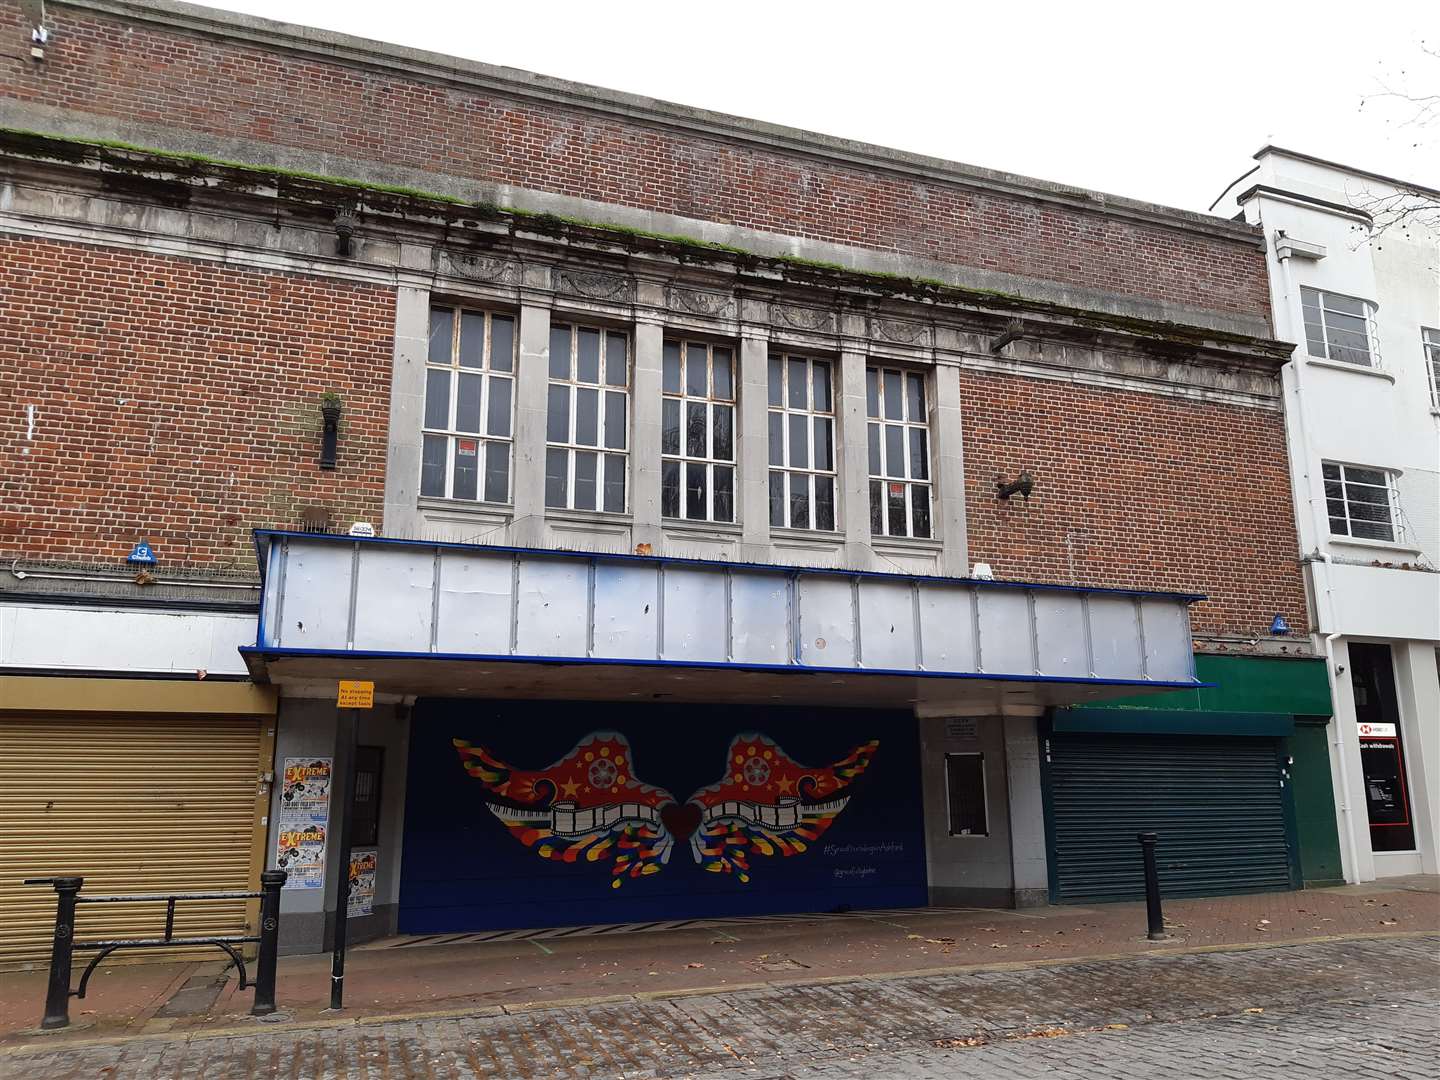 There has been much speculation over the fate of Mecca Bingo in Ashford